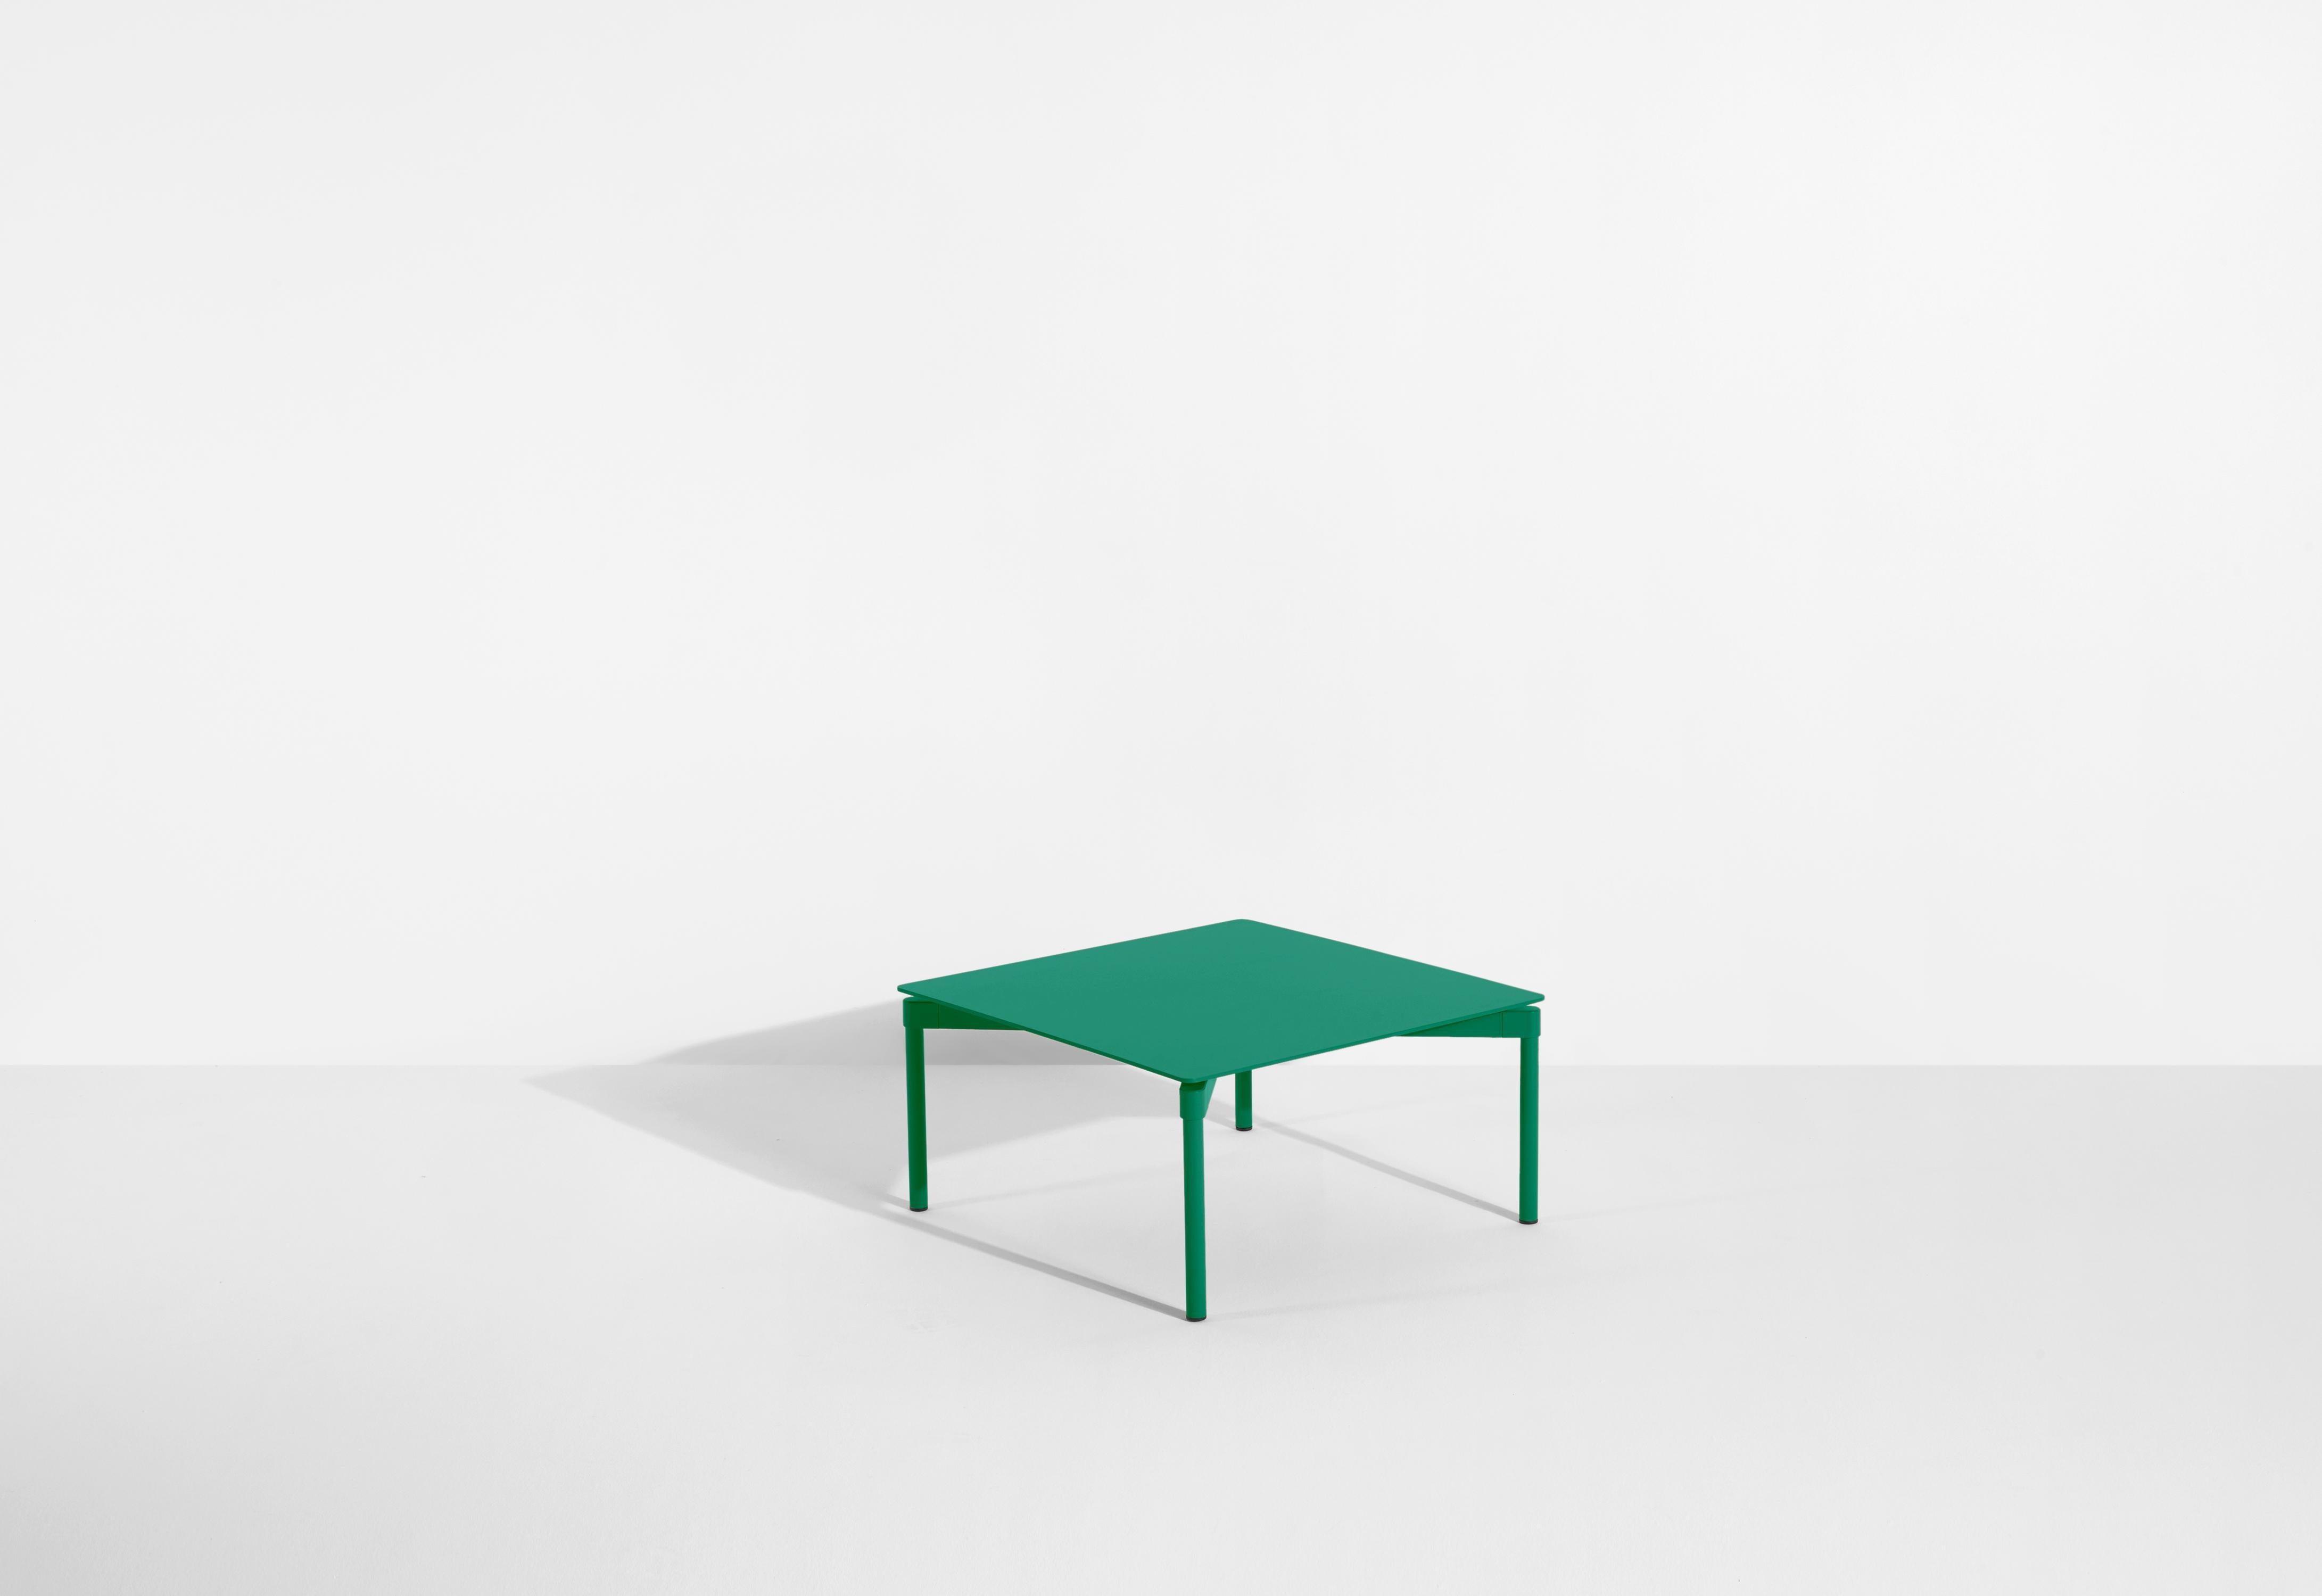 Chinese Petite Friture Fromme Coffee Table in Mint-Green Aluminium by Tom Chung, 2020 For Sale